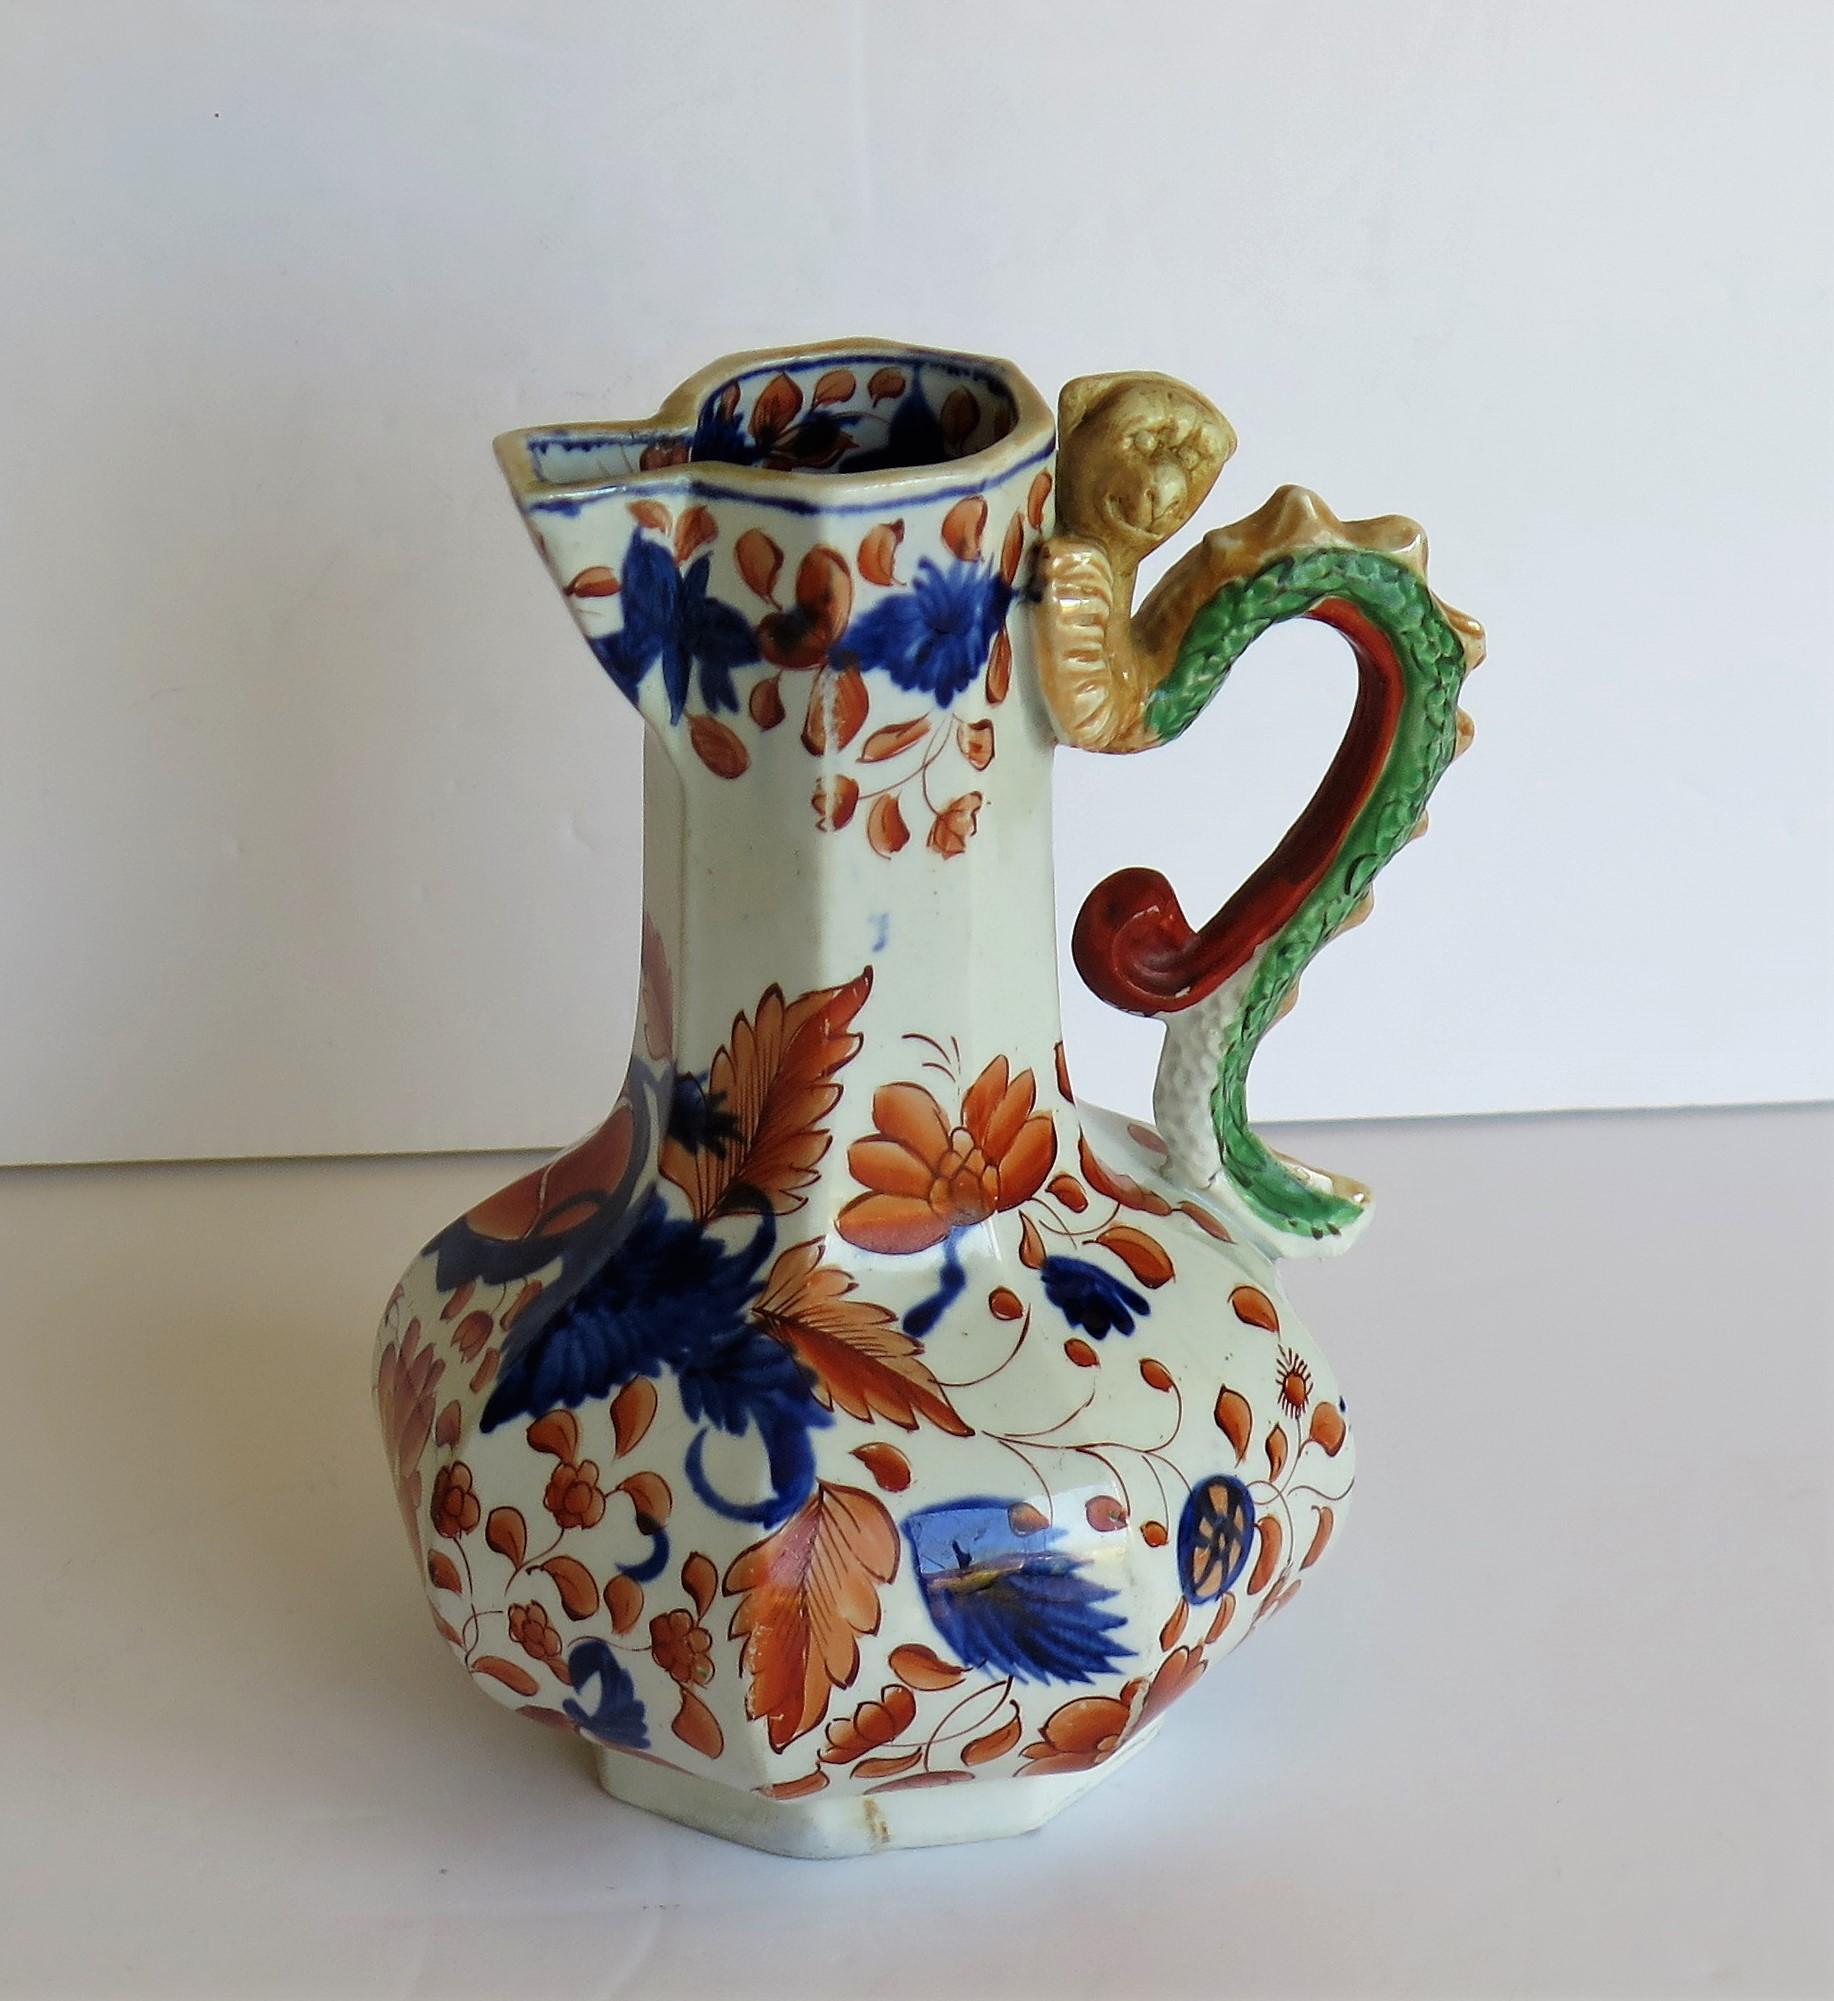 This is a fine and very rare, ironstone pottery jug or pitcher with an elongated neck made by Mason's Ironstone, of Lane Delph, Staffordshire, England, circa 1820.

The jug is octagonal in section with a low foot and an elongated neck having a